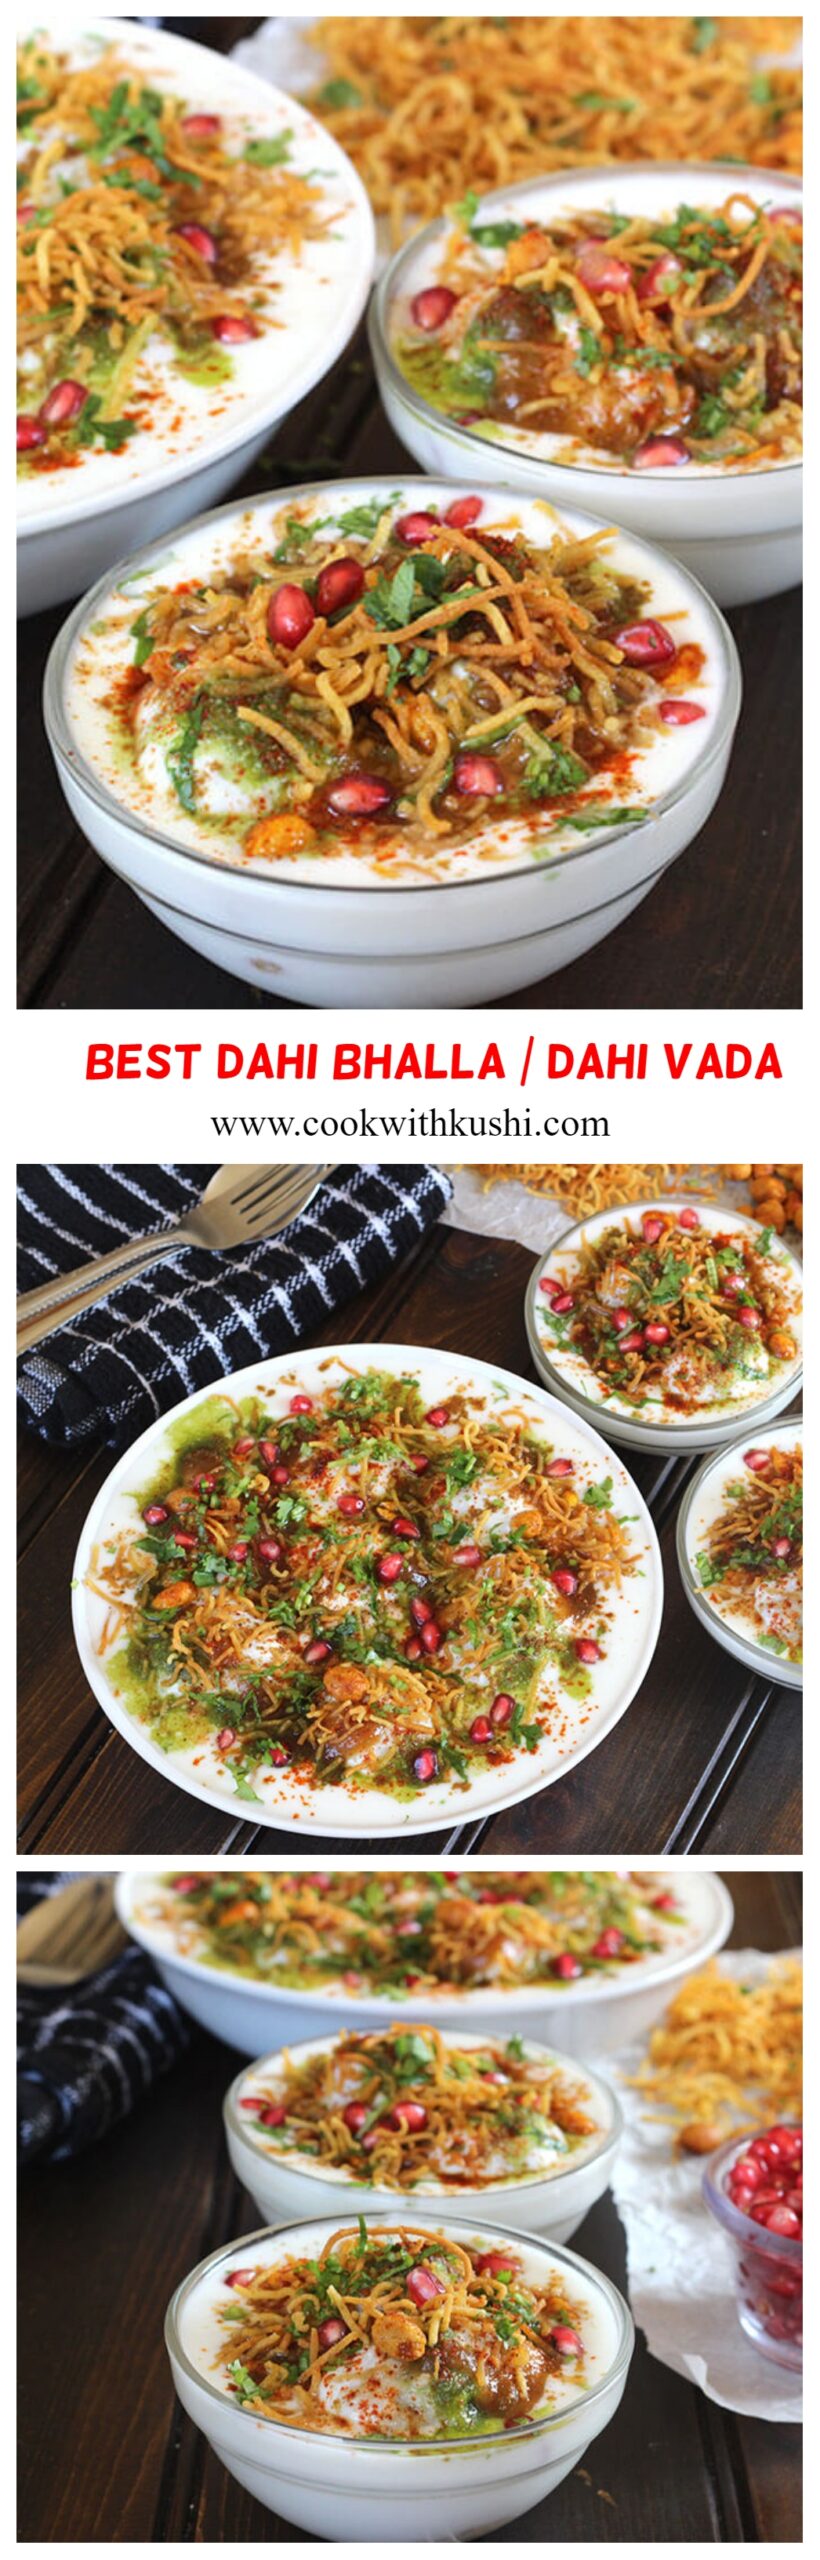 How to make soft and best dahi bhalla or dahi vada at home